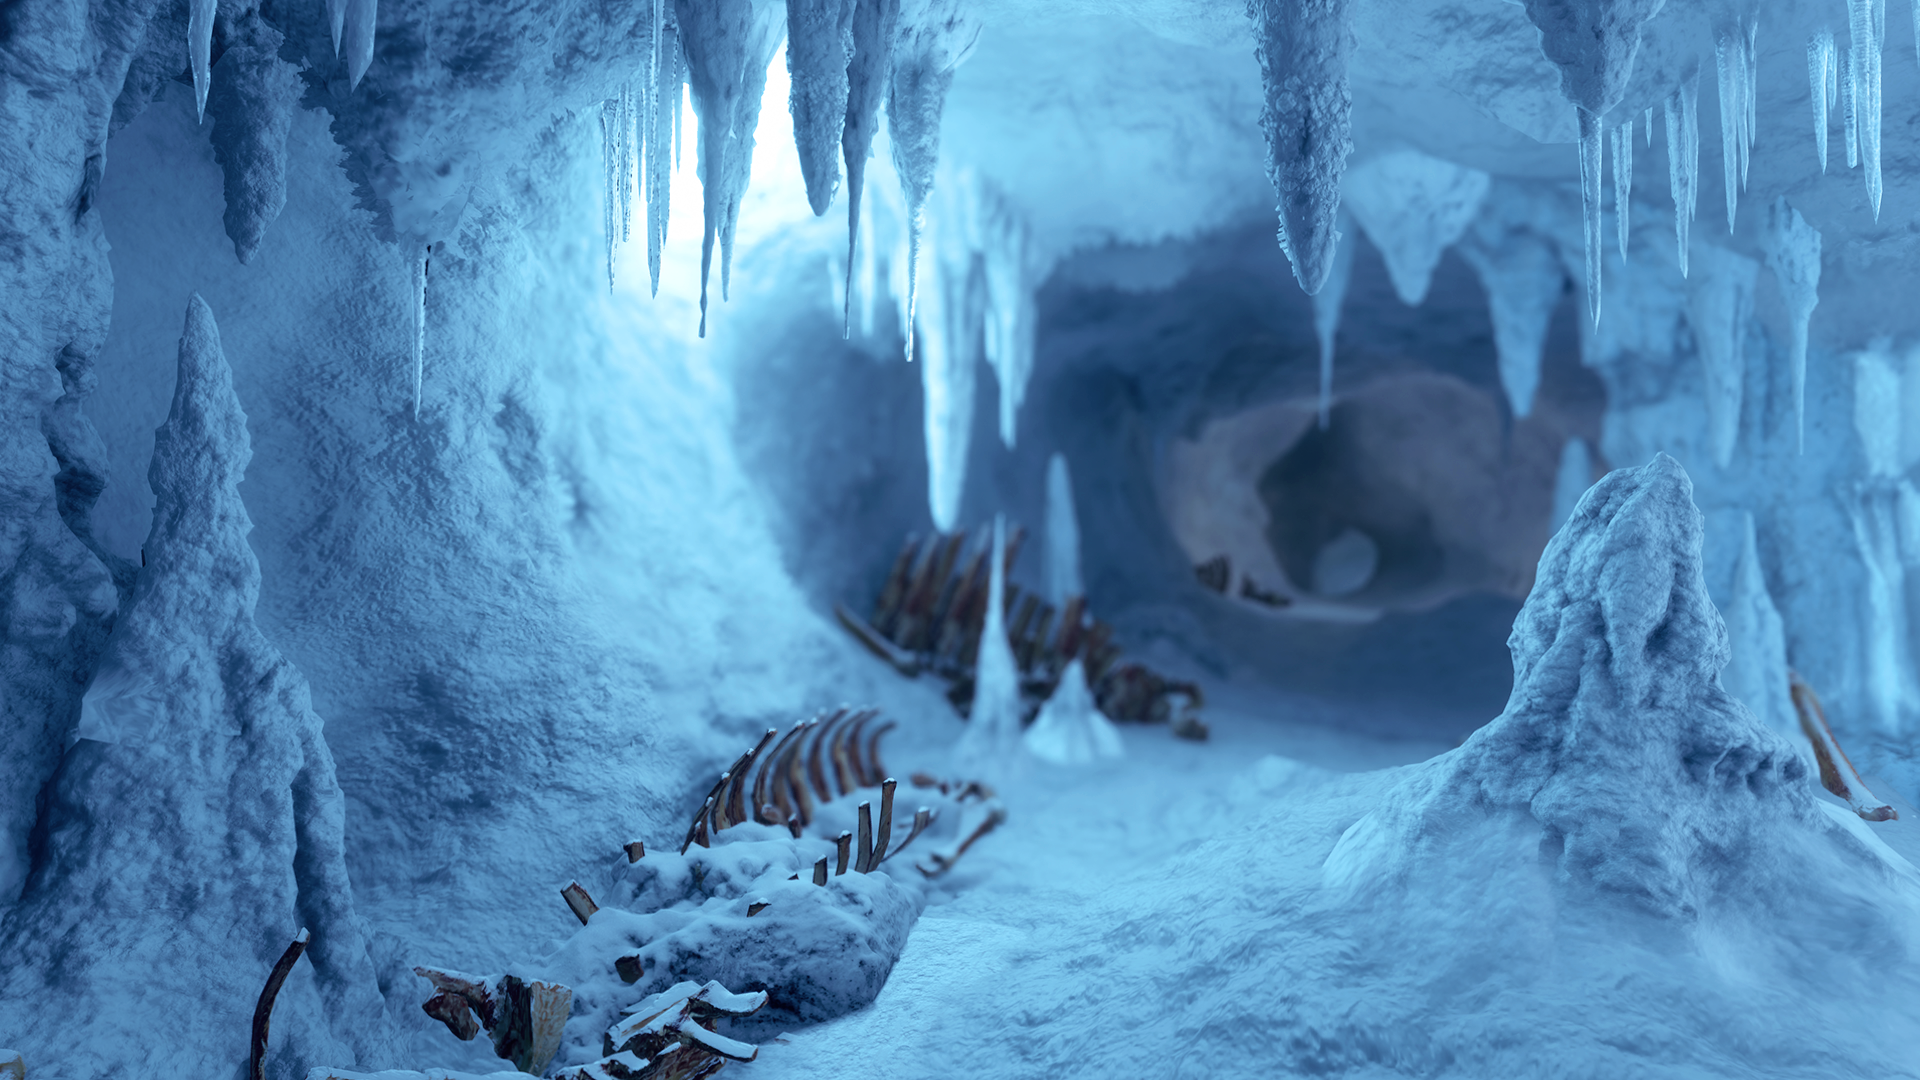 star wars battlefront hoth collectibles